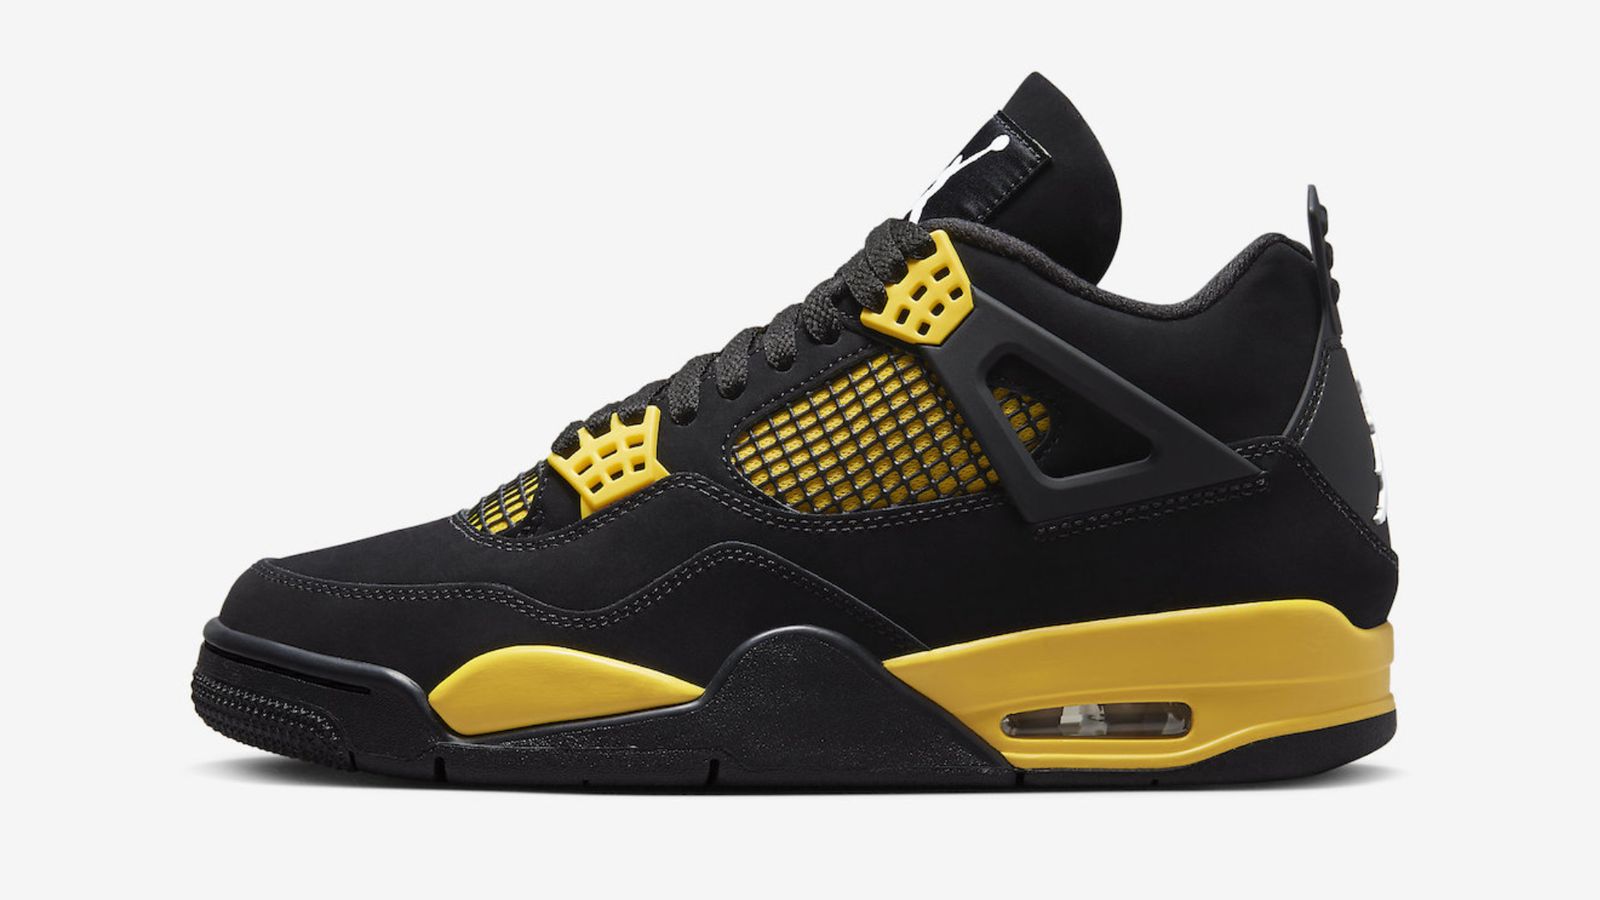 Air Jordan 4 "Thunder" product image of a black basketball shoe featuring yellow details.